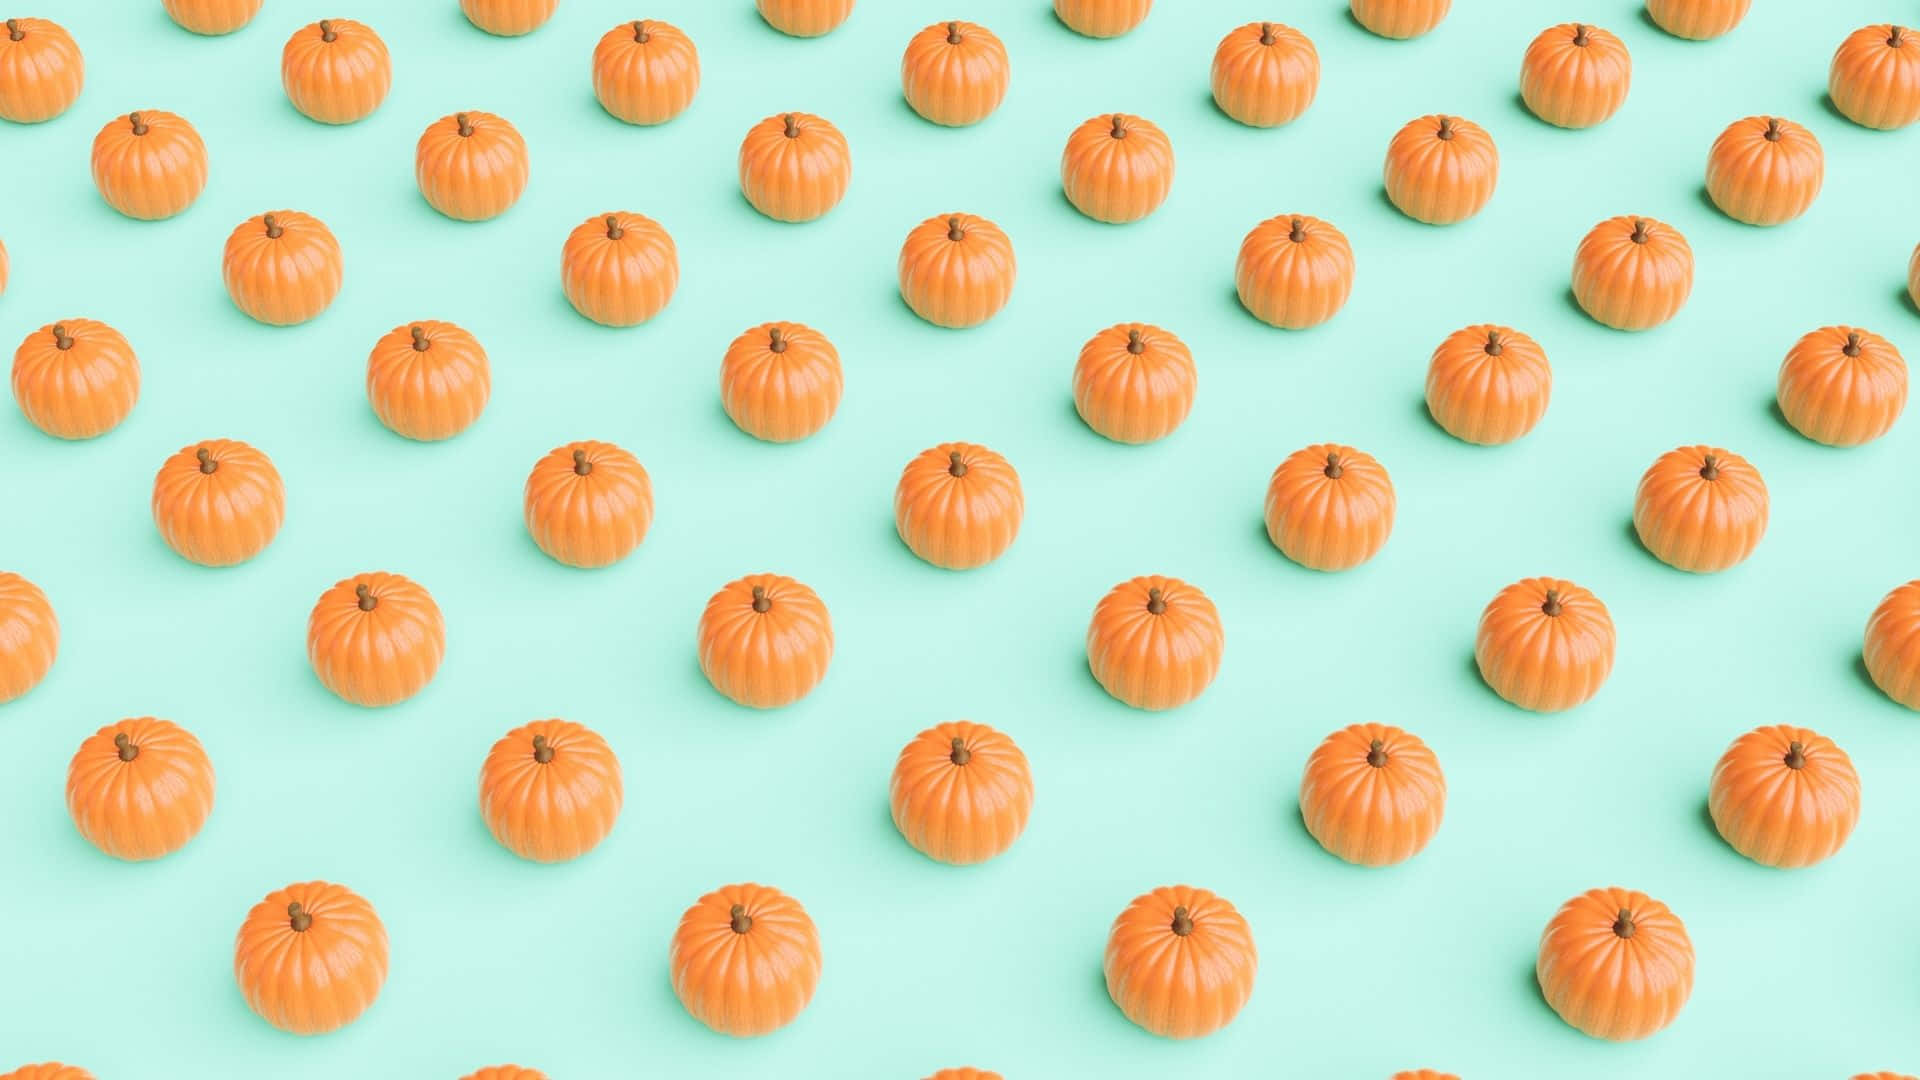 Adorable Cute Pumpkin with a Smiling Face Wallpaper